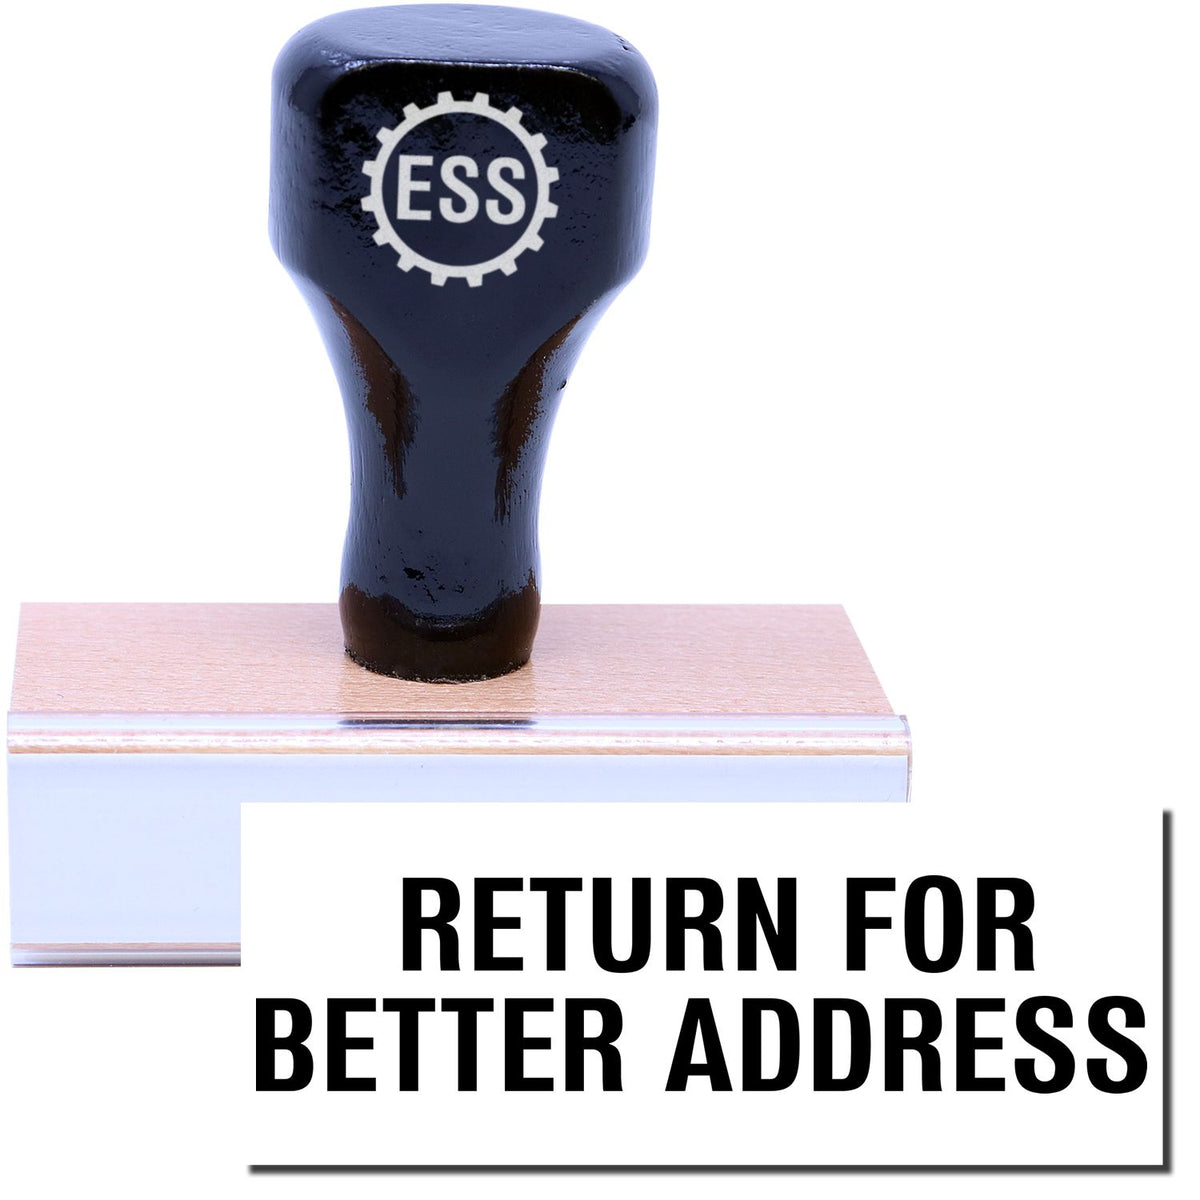 A stock office rubber stamp with a stamped image showing how the text &quot;RETURN FOR BETTER ADDRESS&quot; in a large font is displayed after stamping.